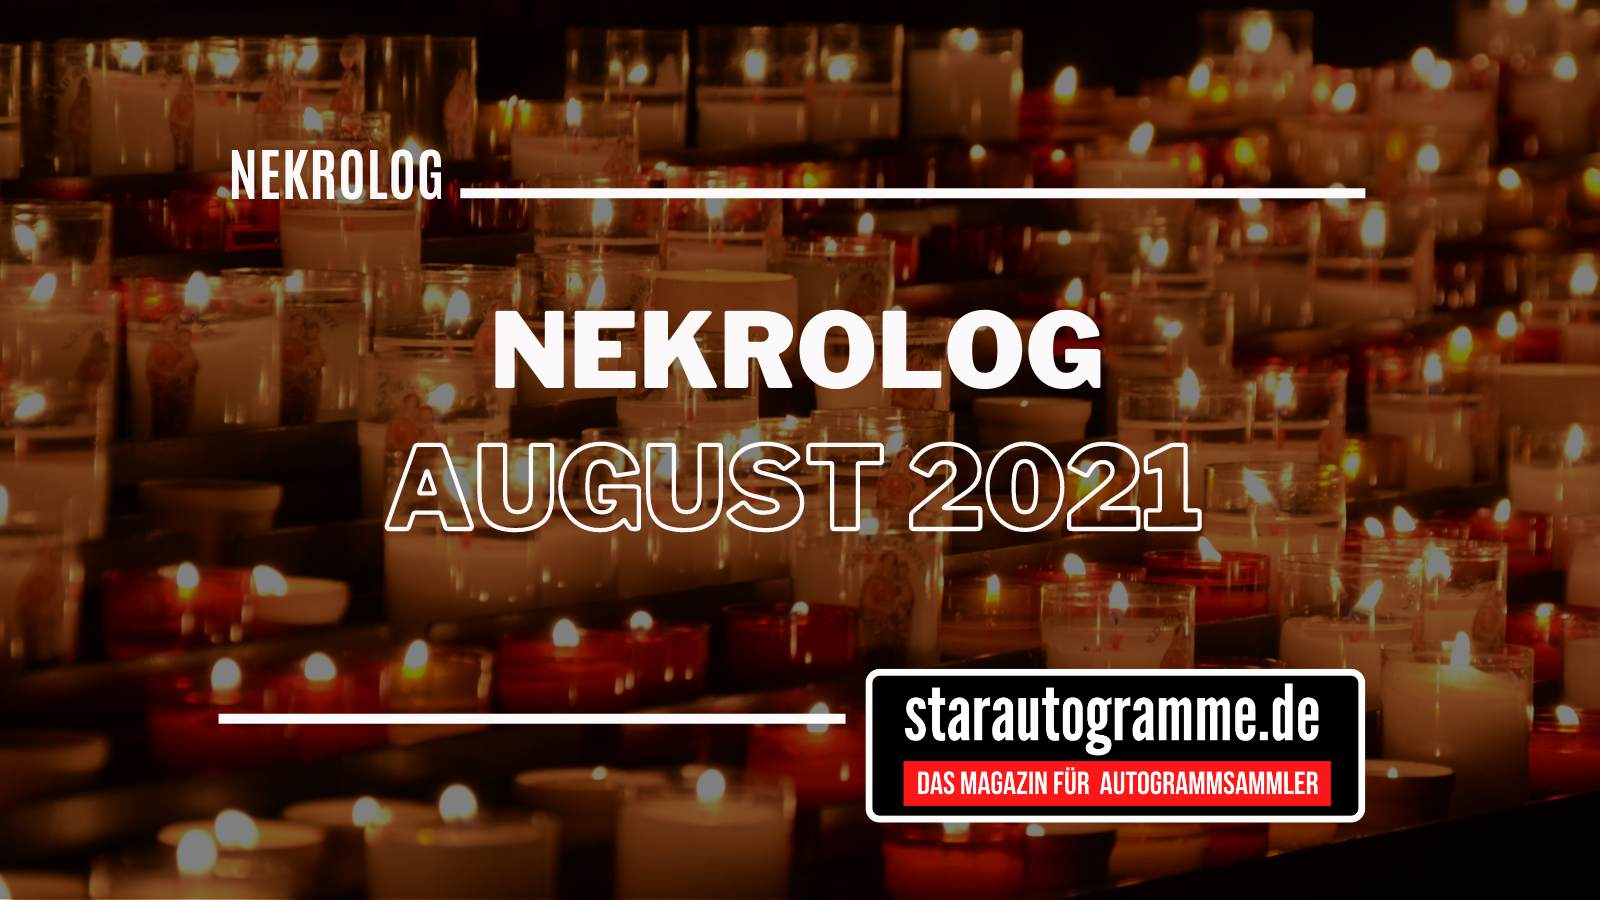 You are currently viewing Nekrolog August 2021